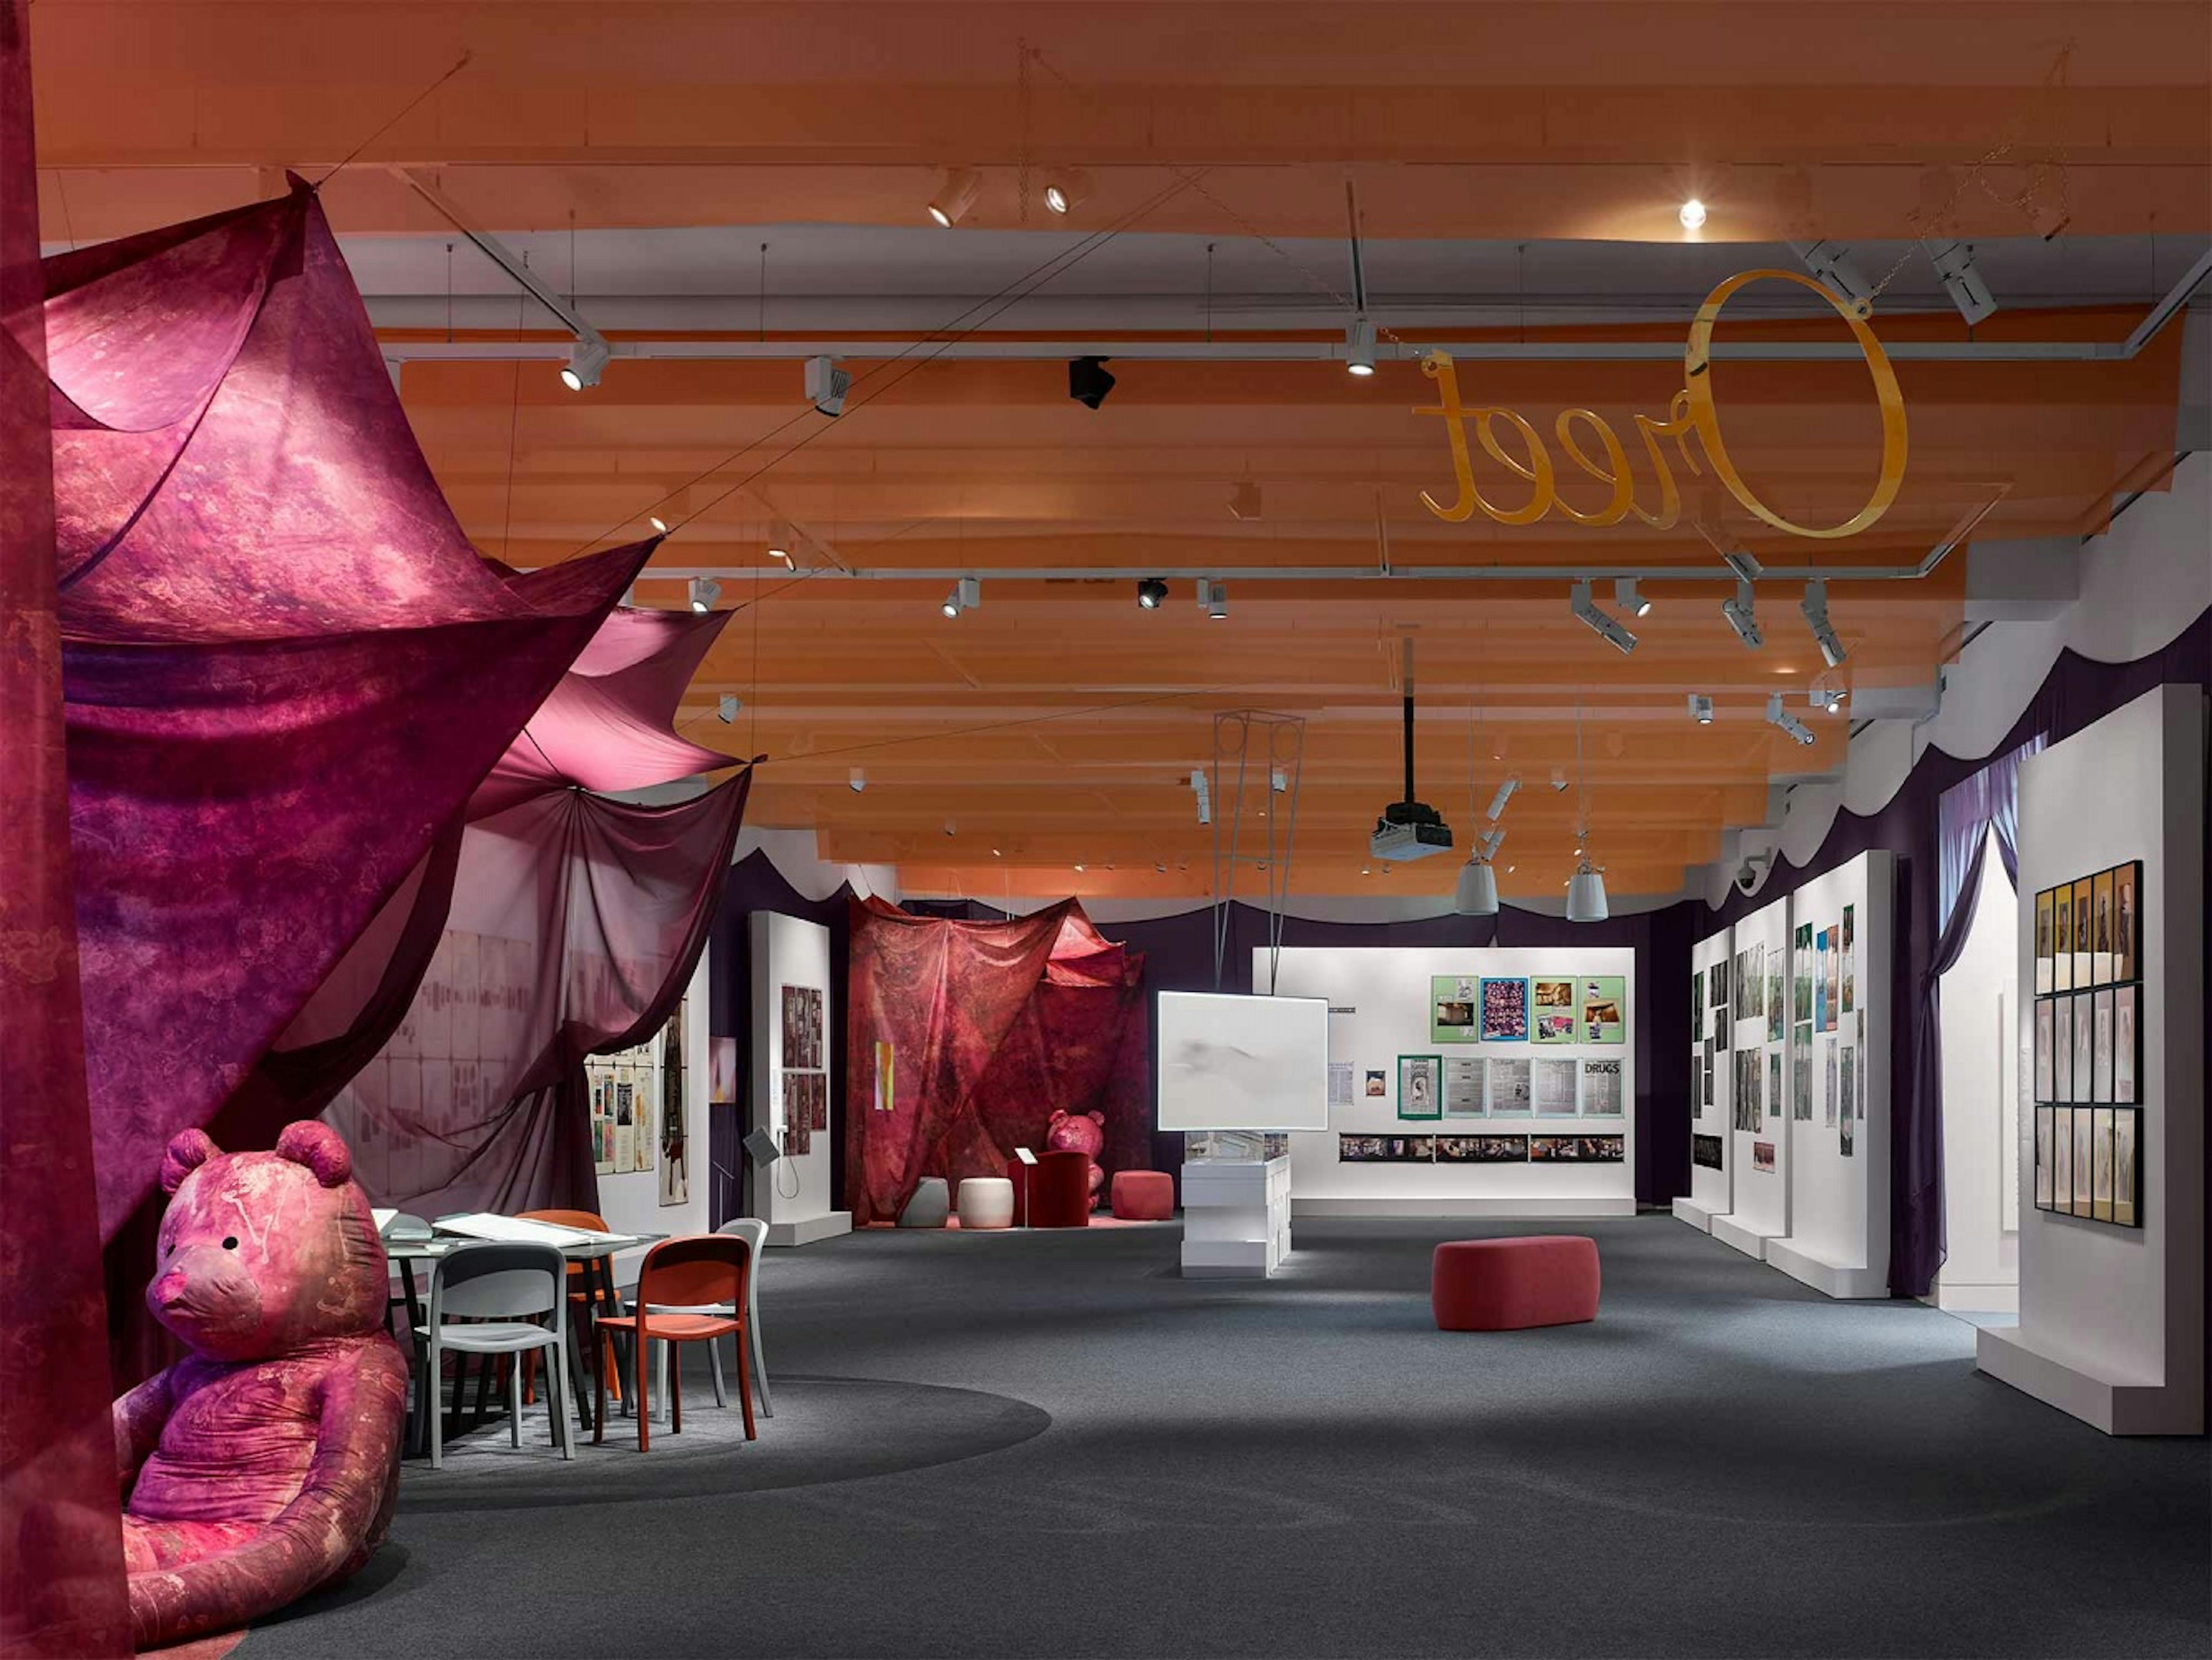 The installation includes photographs on walls of Jo Spence and lots of draped fabric creating a comforting environment. On the ceiling, Oreet Ashery's name is spelled out in gold. 